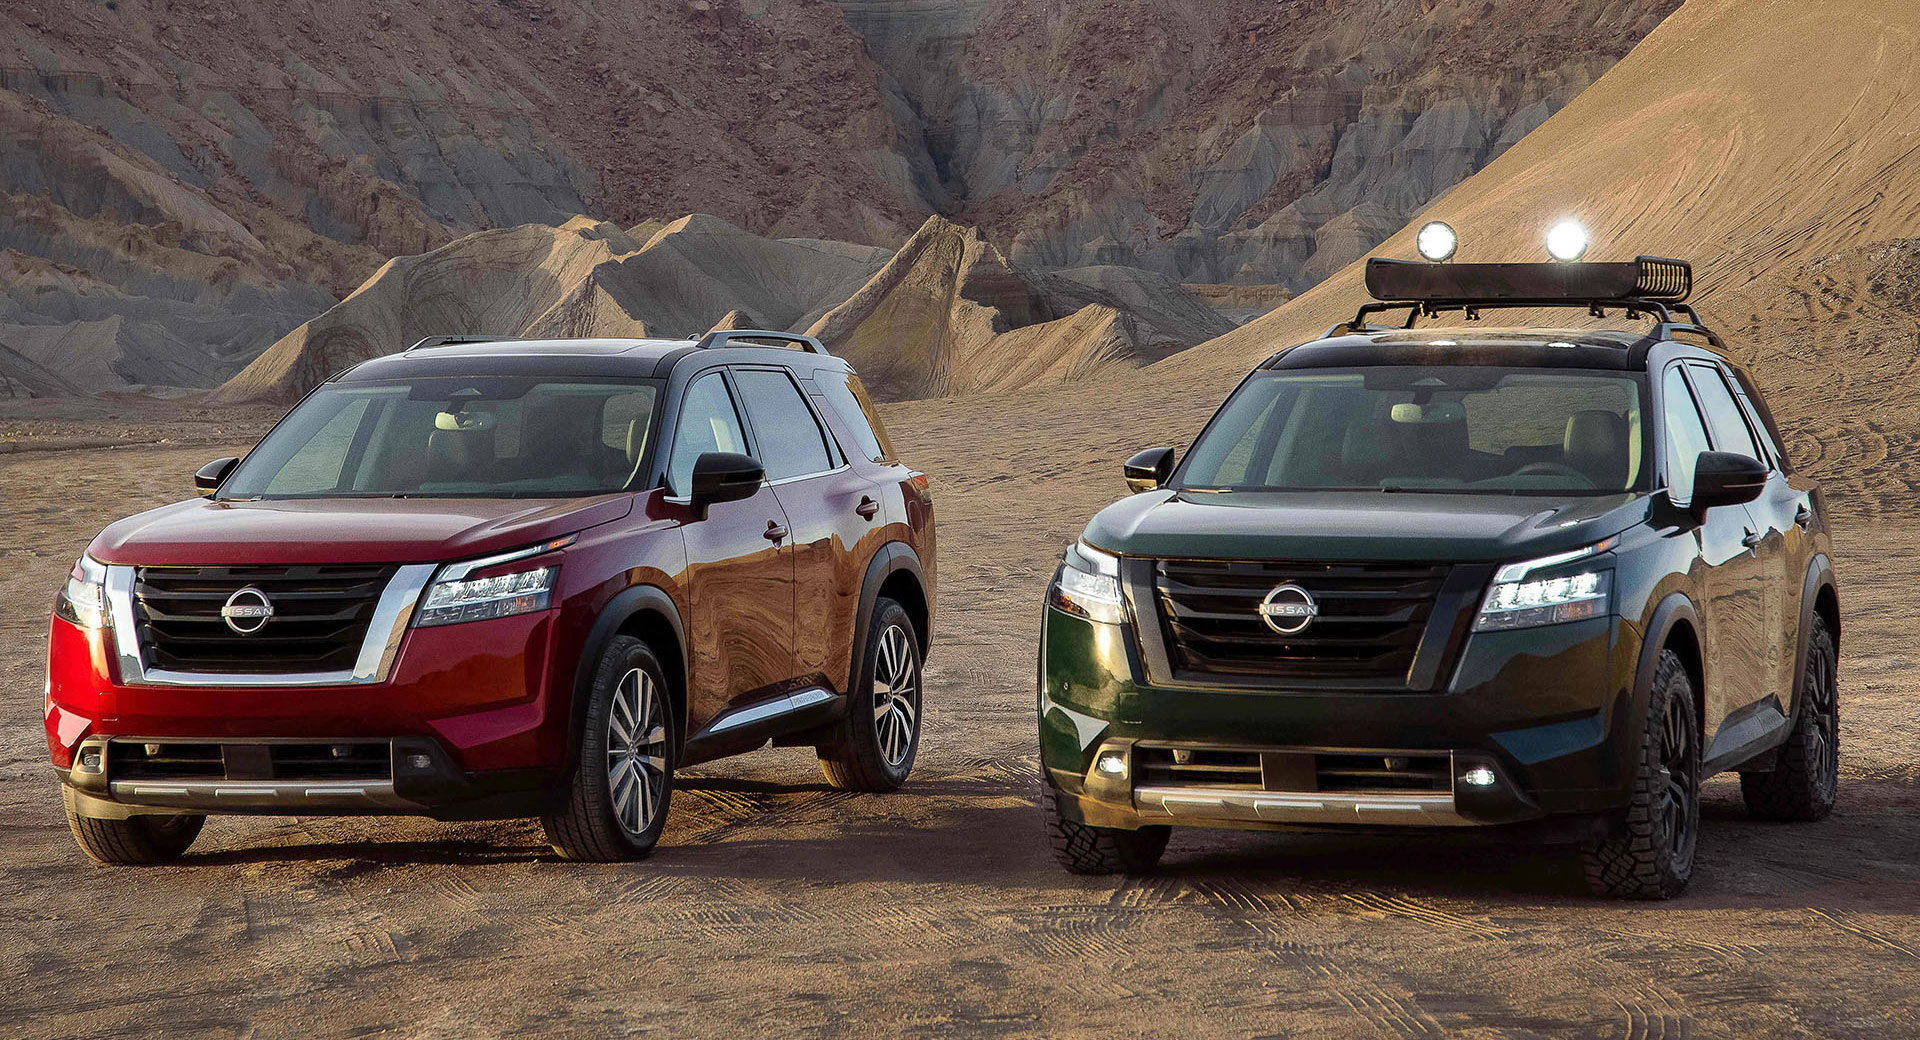 2022 Nissan Pathfinder Returns With Seating For Eight, Beefy Looks And